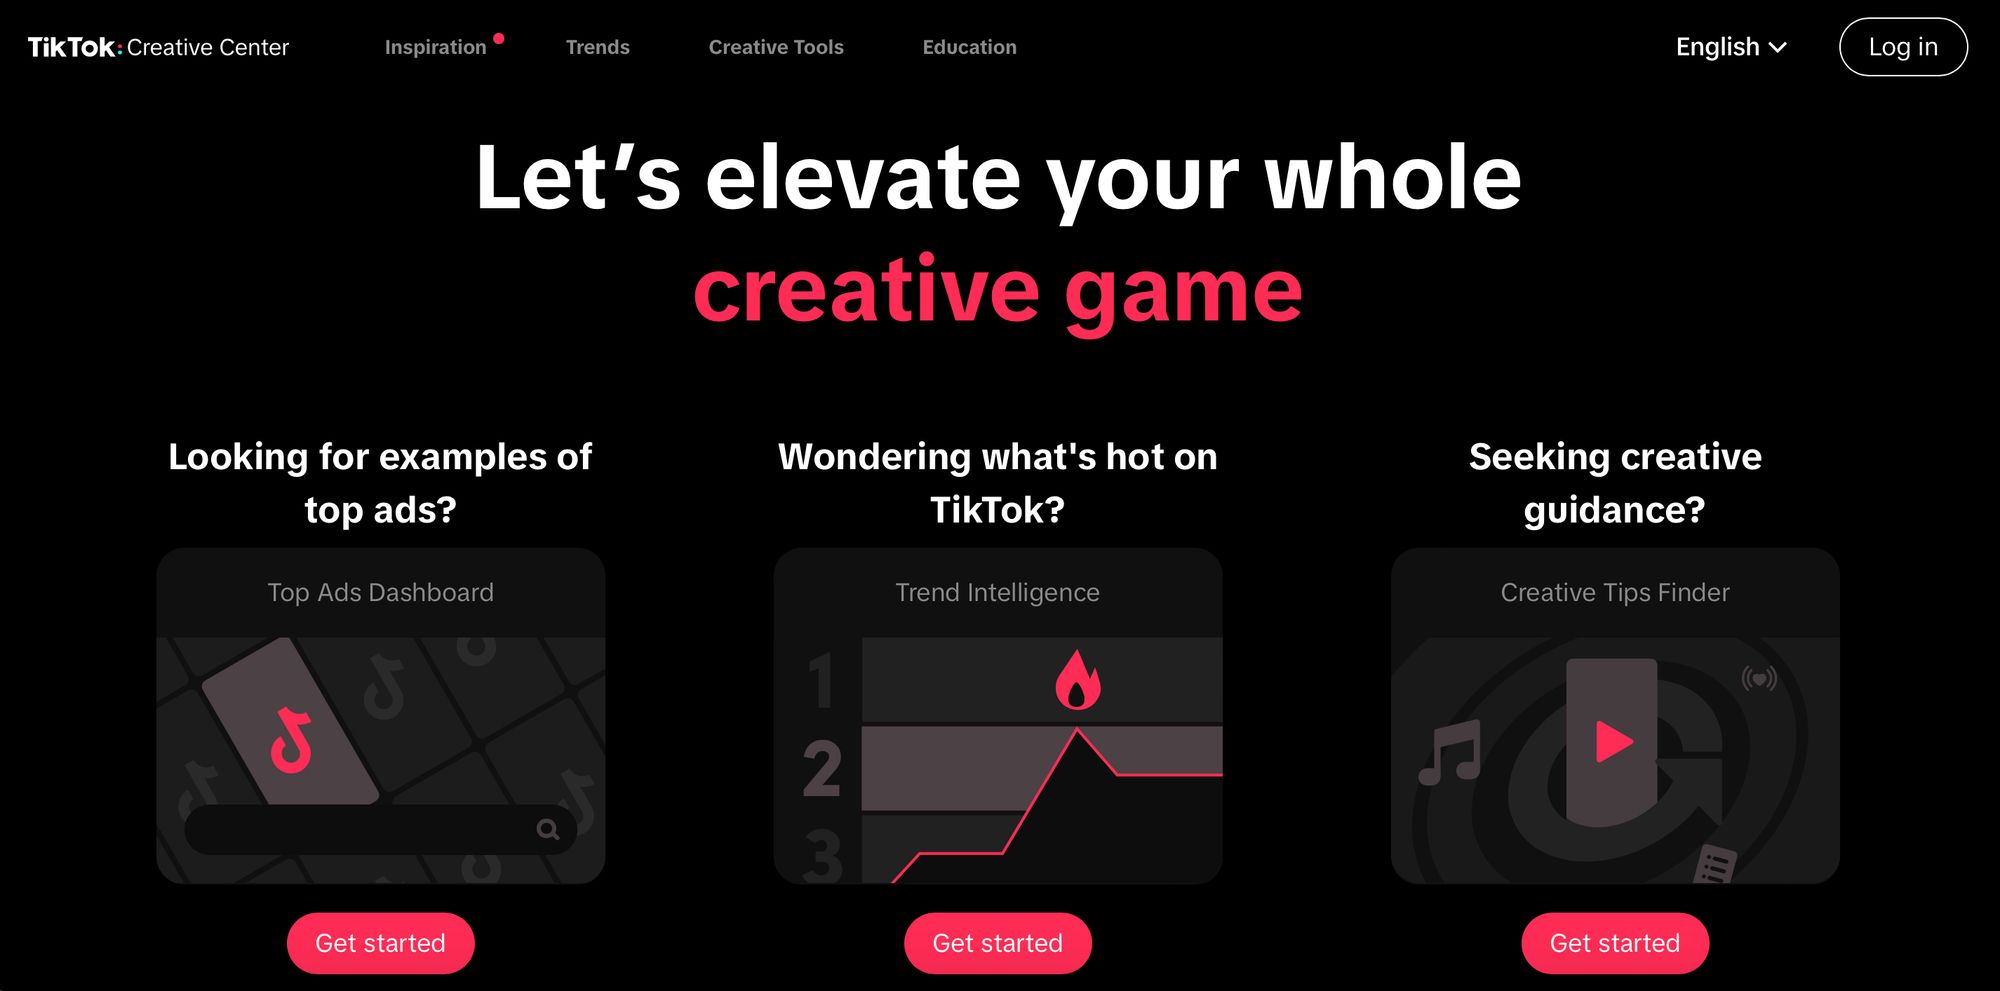 Find inspiration, education, trends and creative tools in TikTok's Creative Center